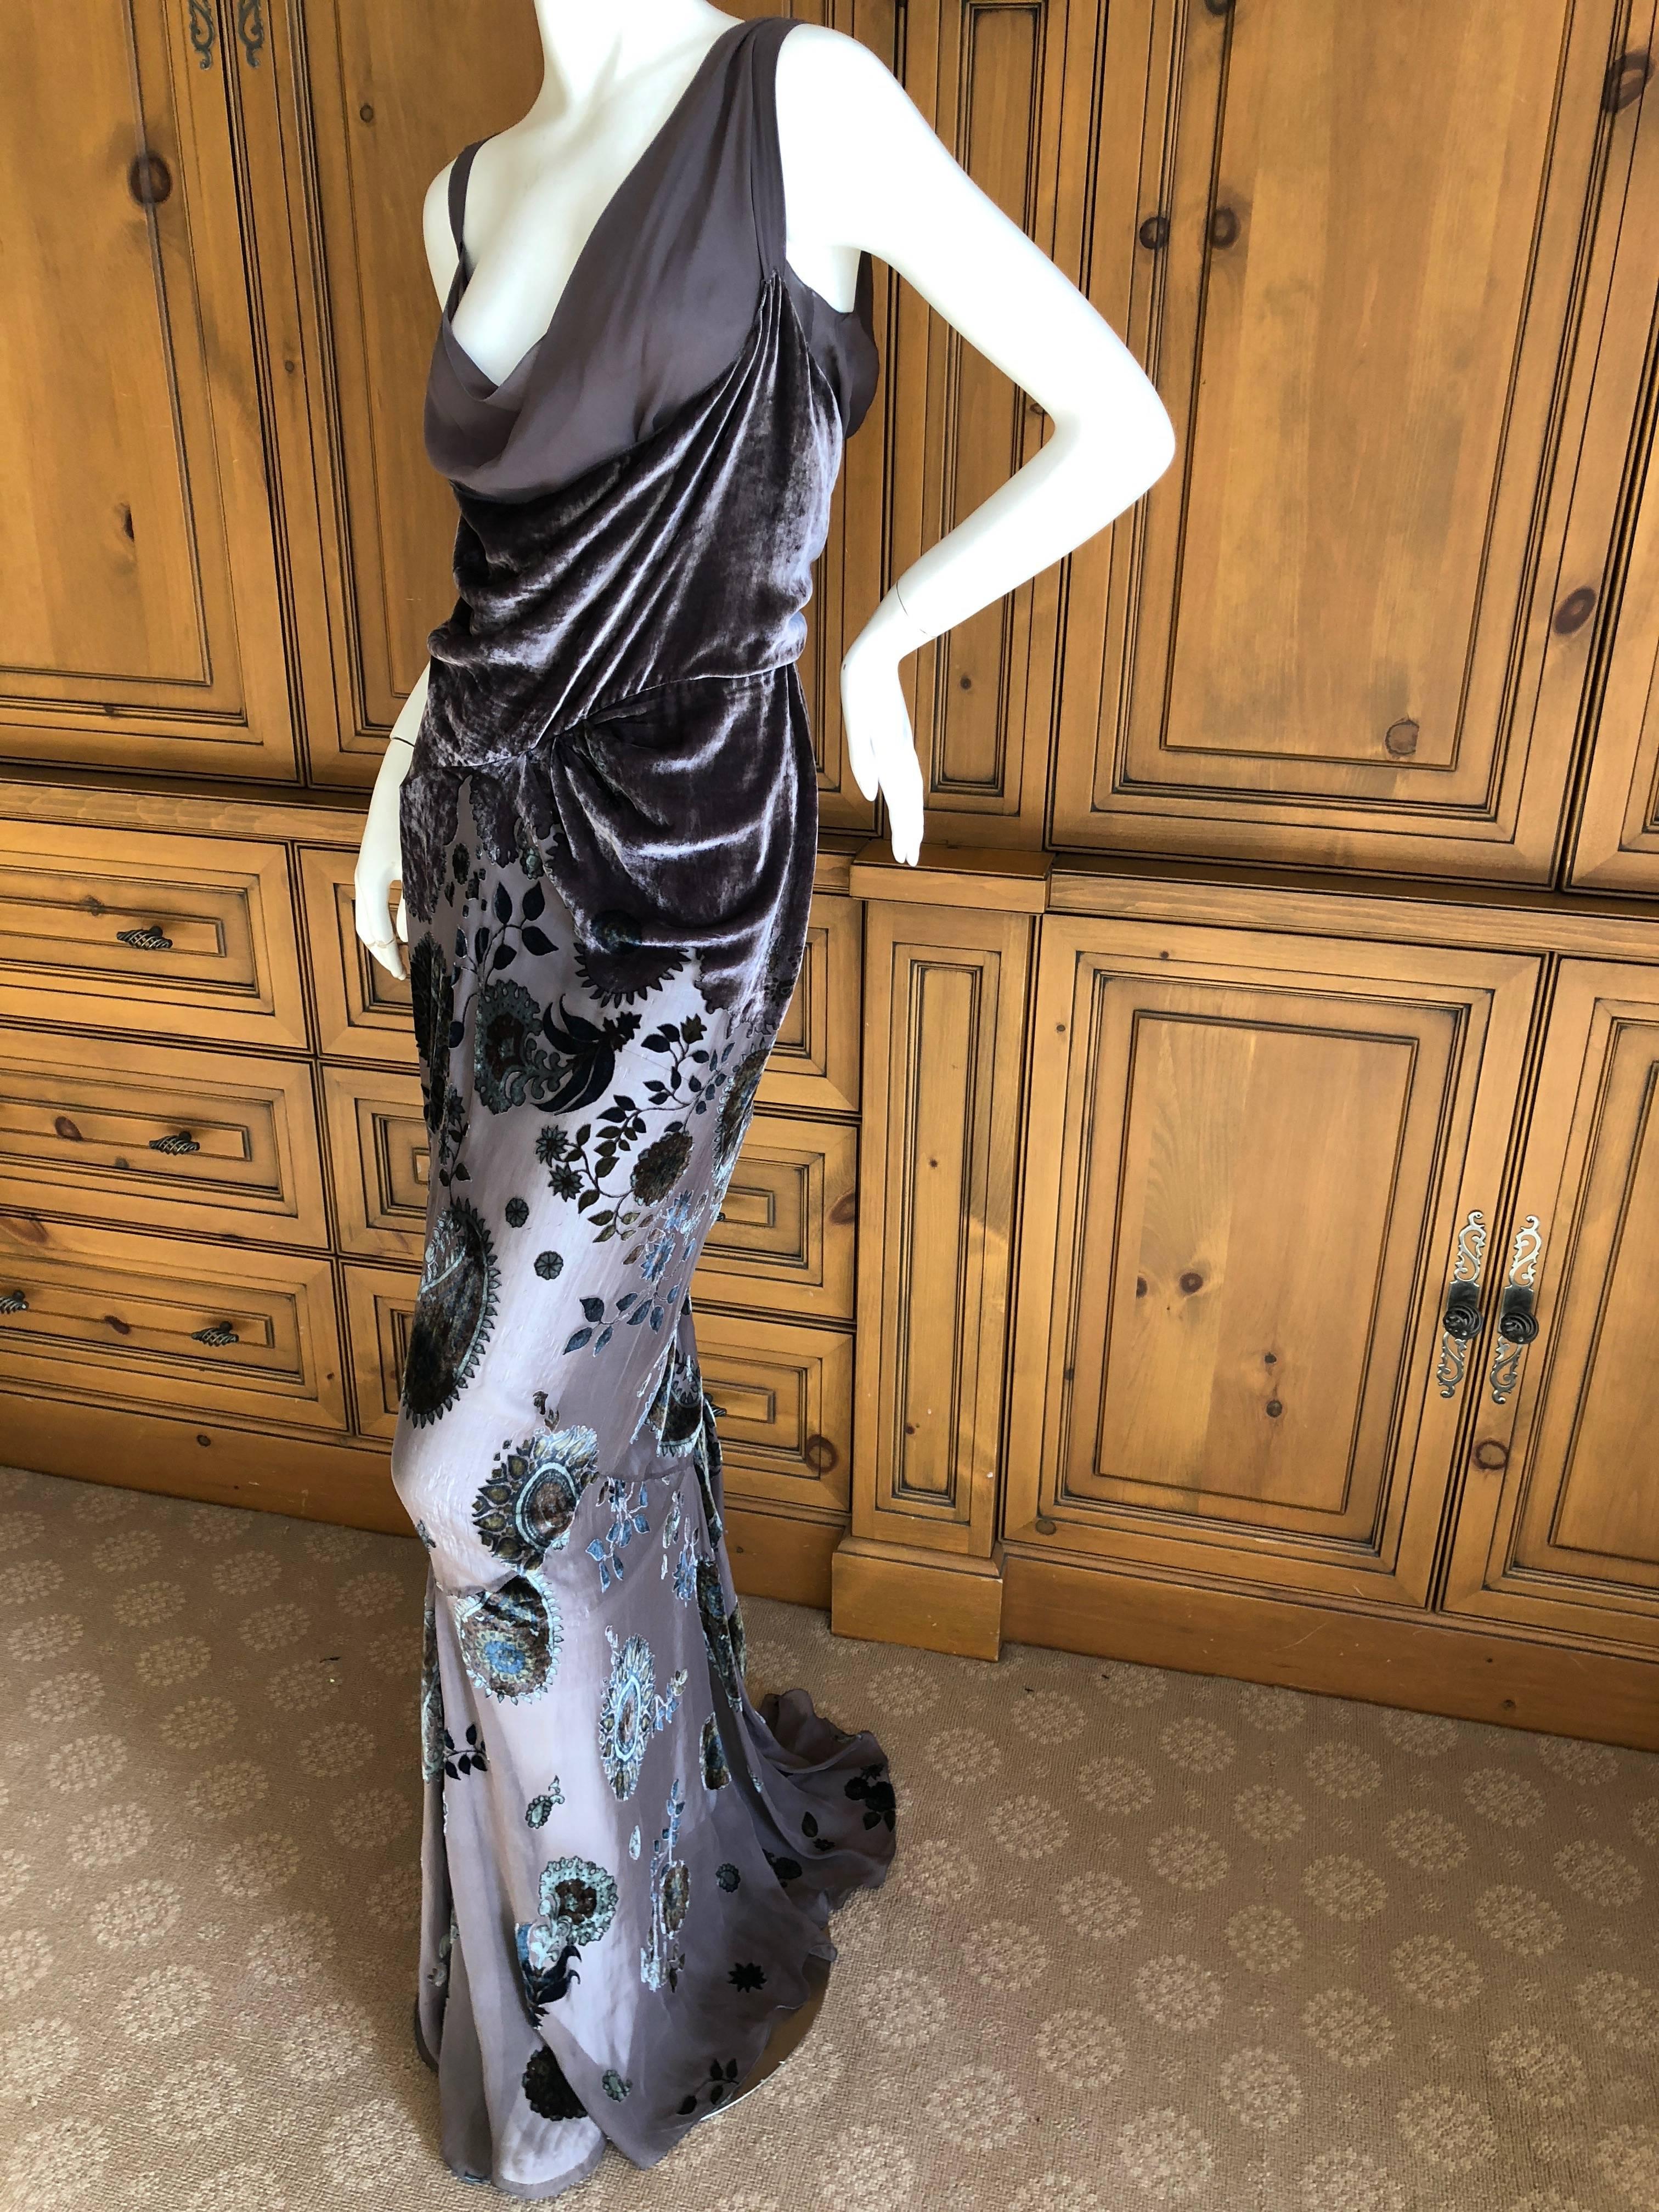 Exquisite gray devore velvet floral gown from John Galliano for Christian Dior.
There is a detached full silk slip, which I photographed separately . I also include photos of the dress worn without the slip, so the skirt is sheer.
Photos don't